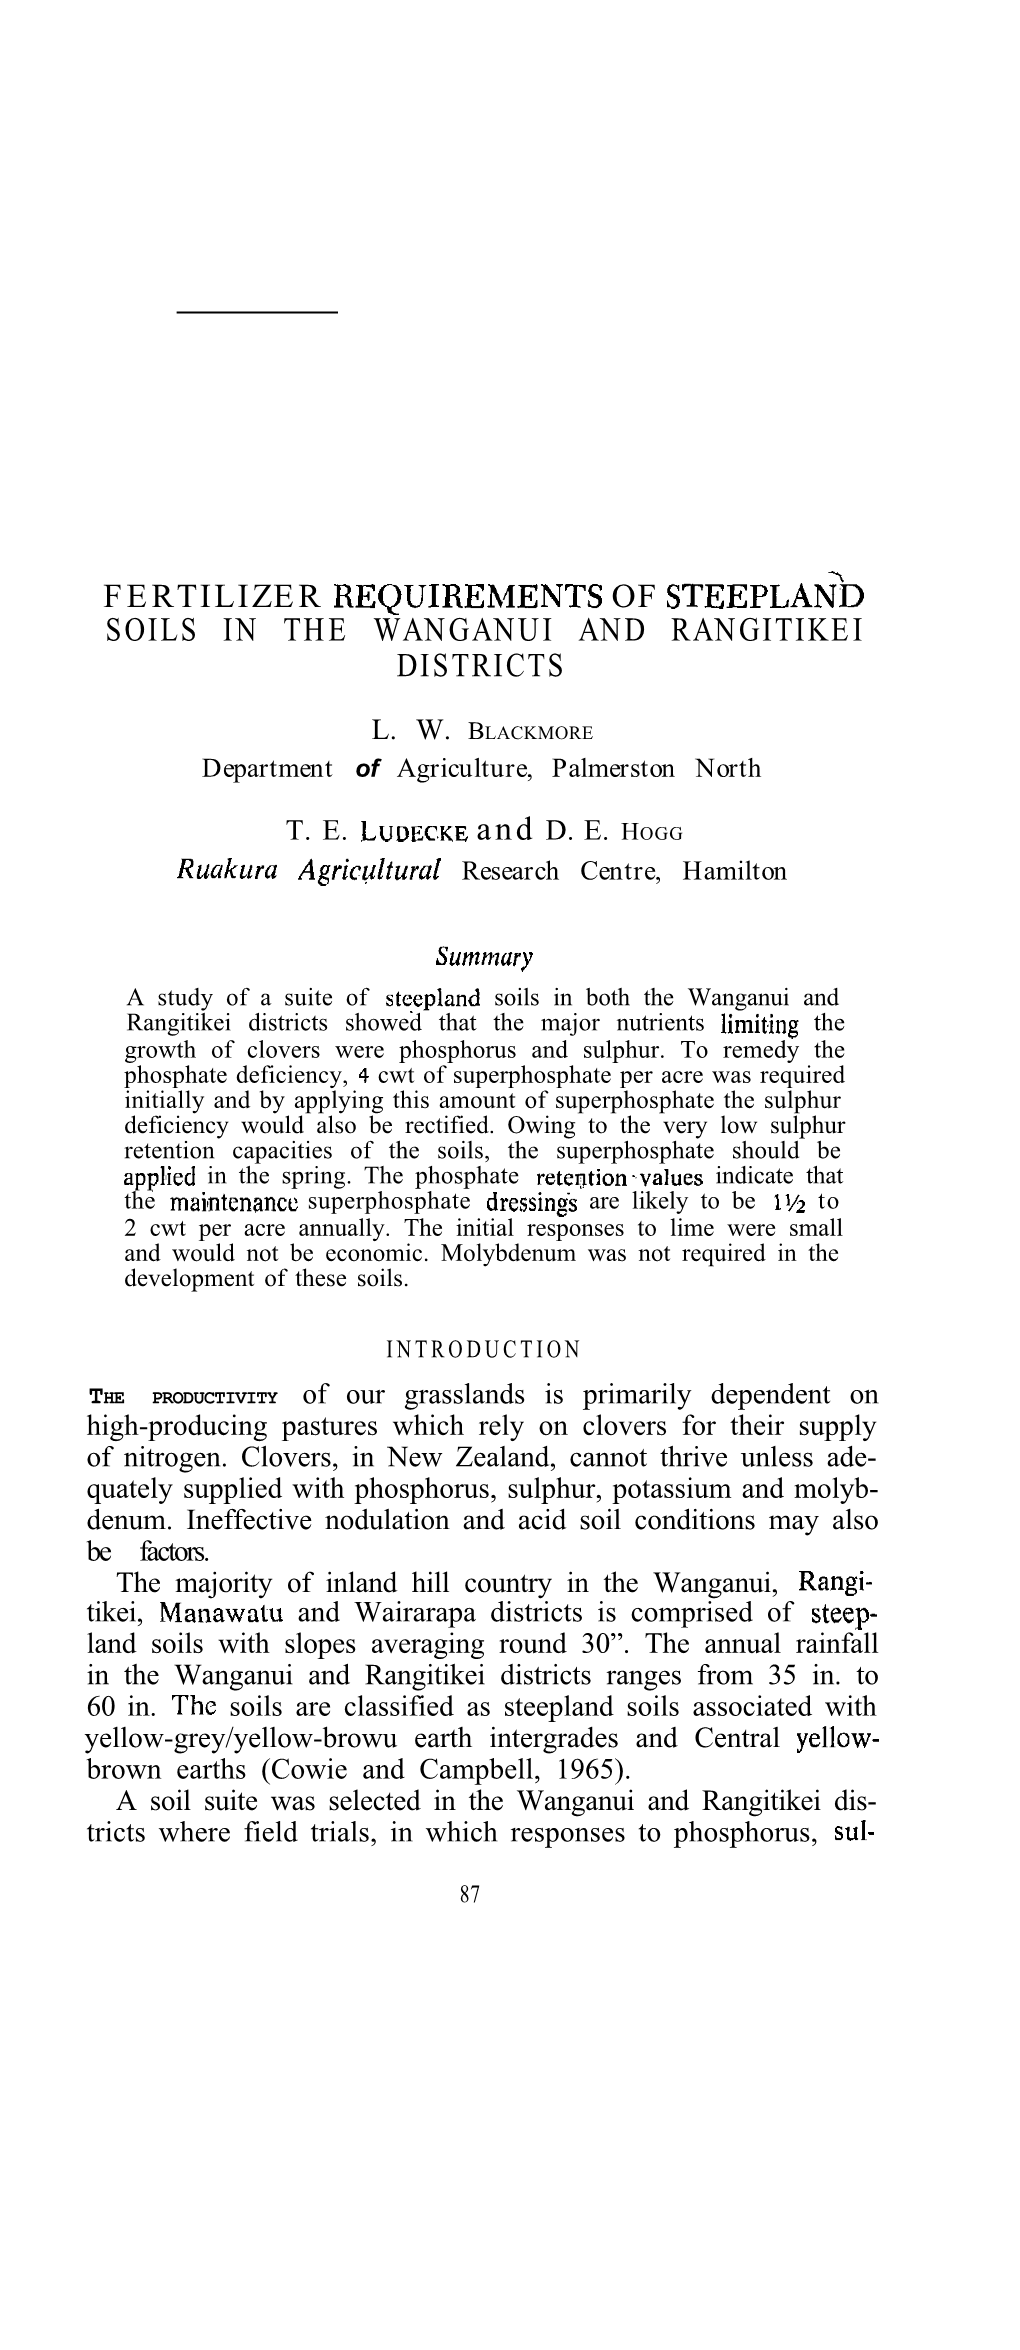 Fertilizer Requirements of Steepland Soils in the Wanganui And